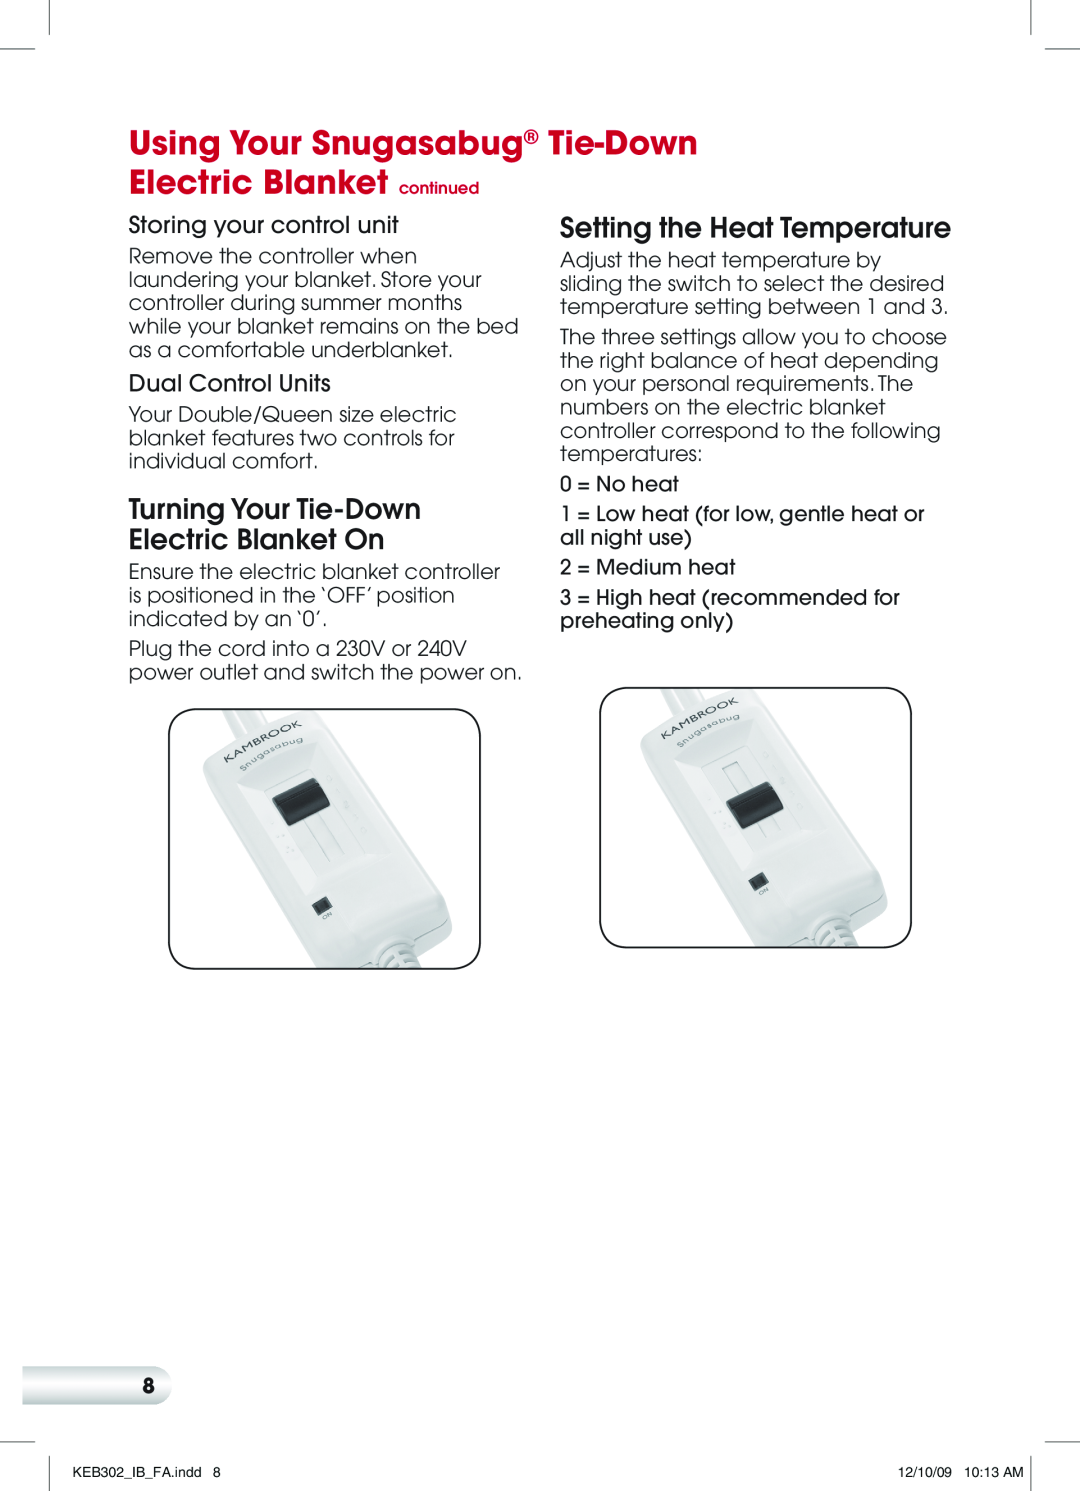 Kambrook KEB312, KEB302 Turning Your Tie-Down Electric Blanket On, Setting the Heat Temperature, Storing your control unit 